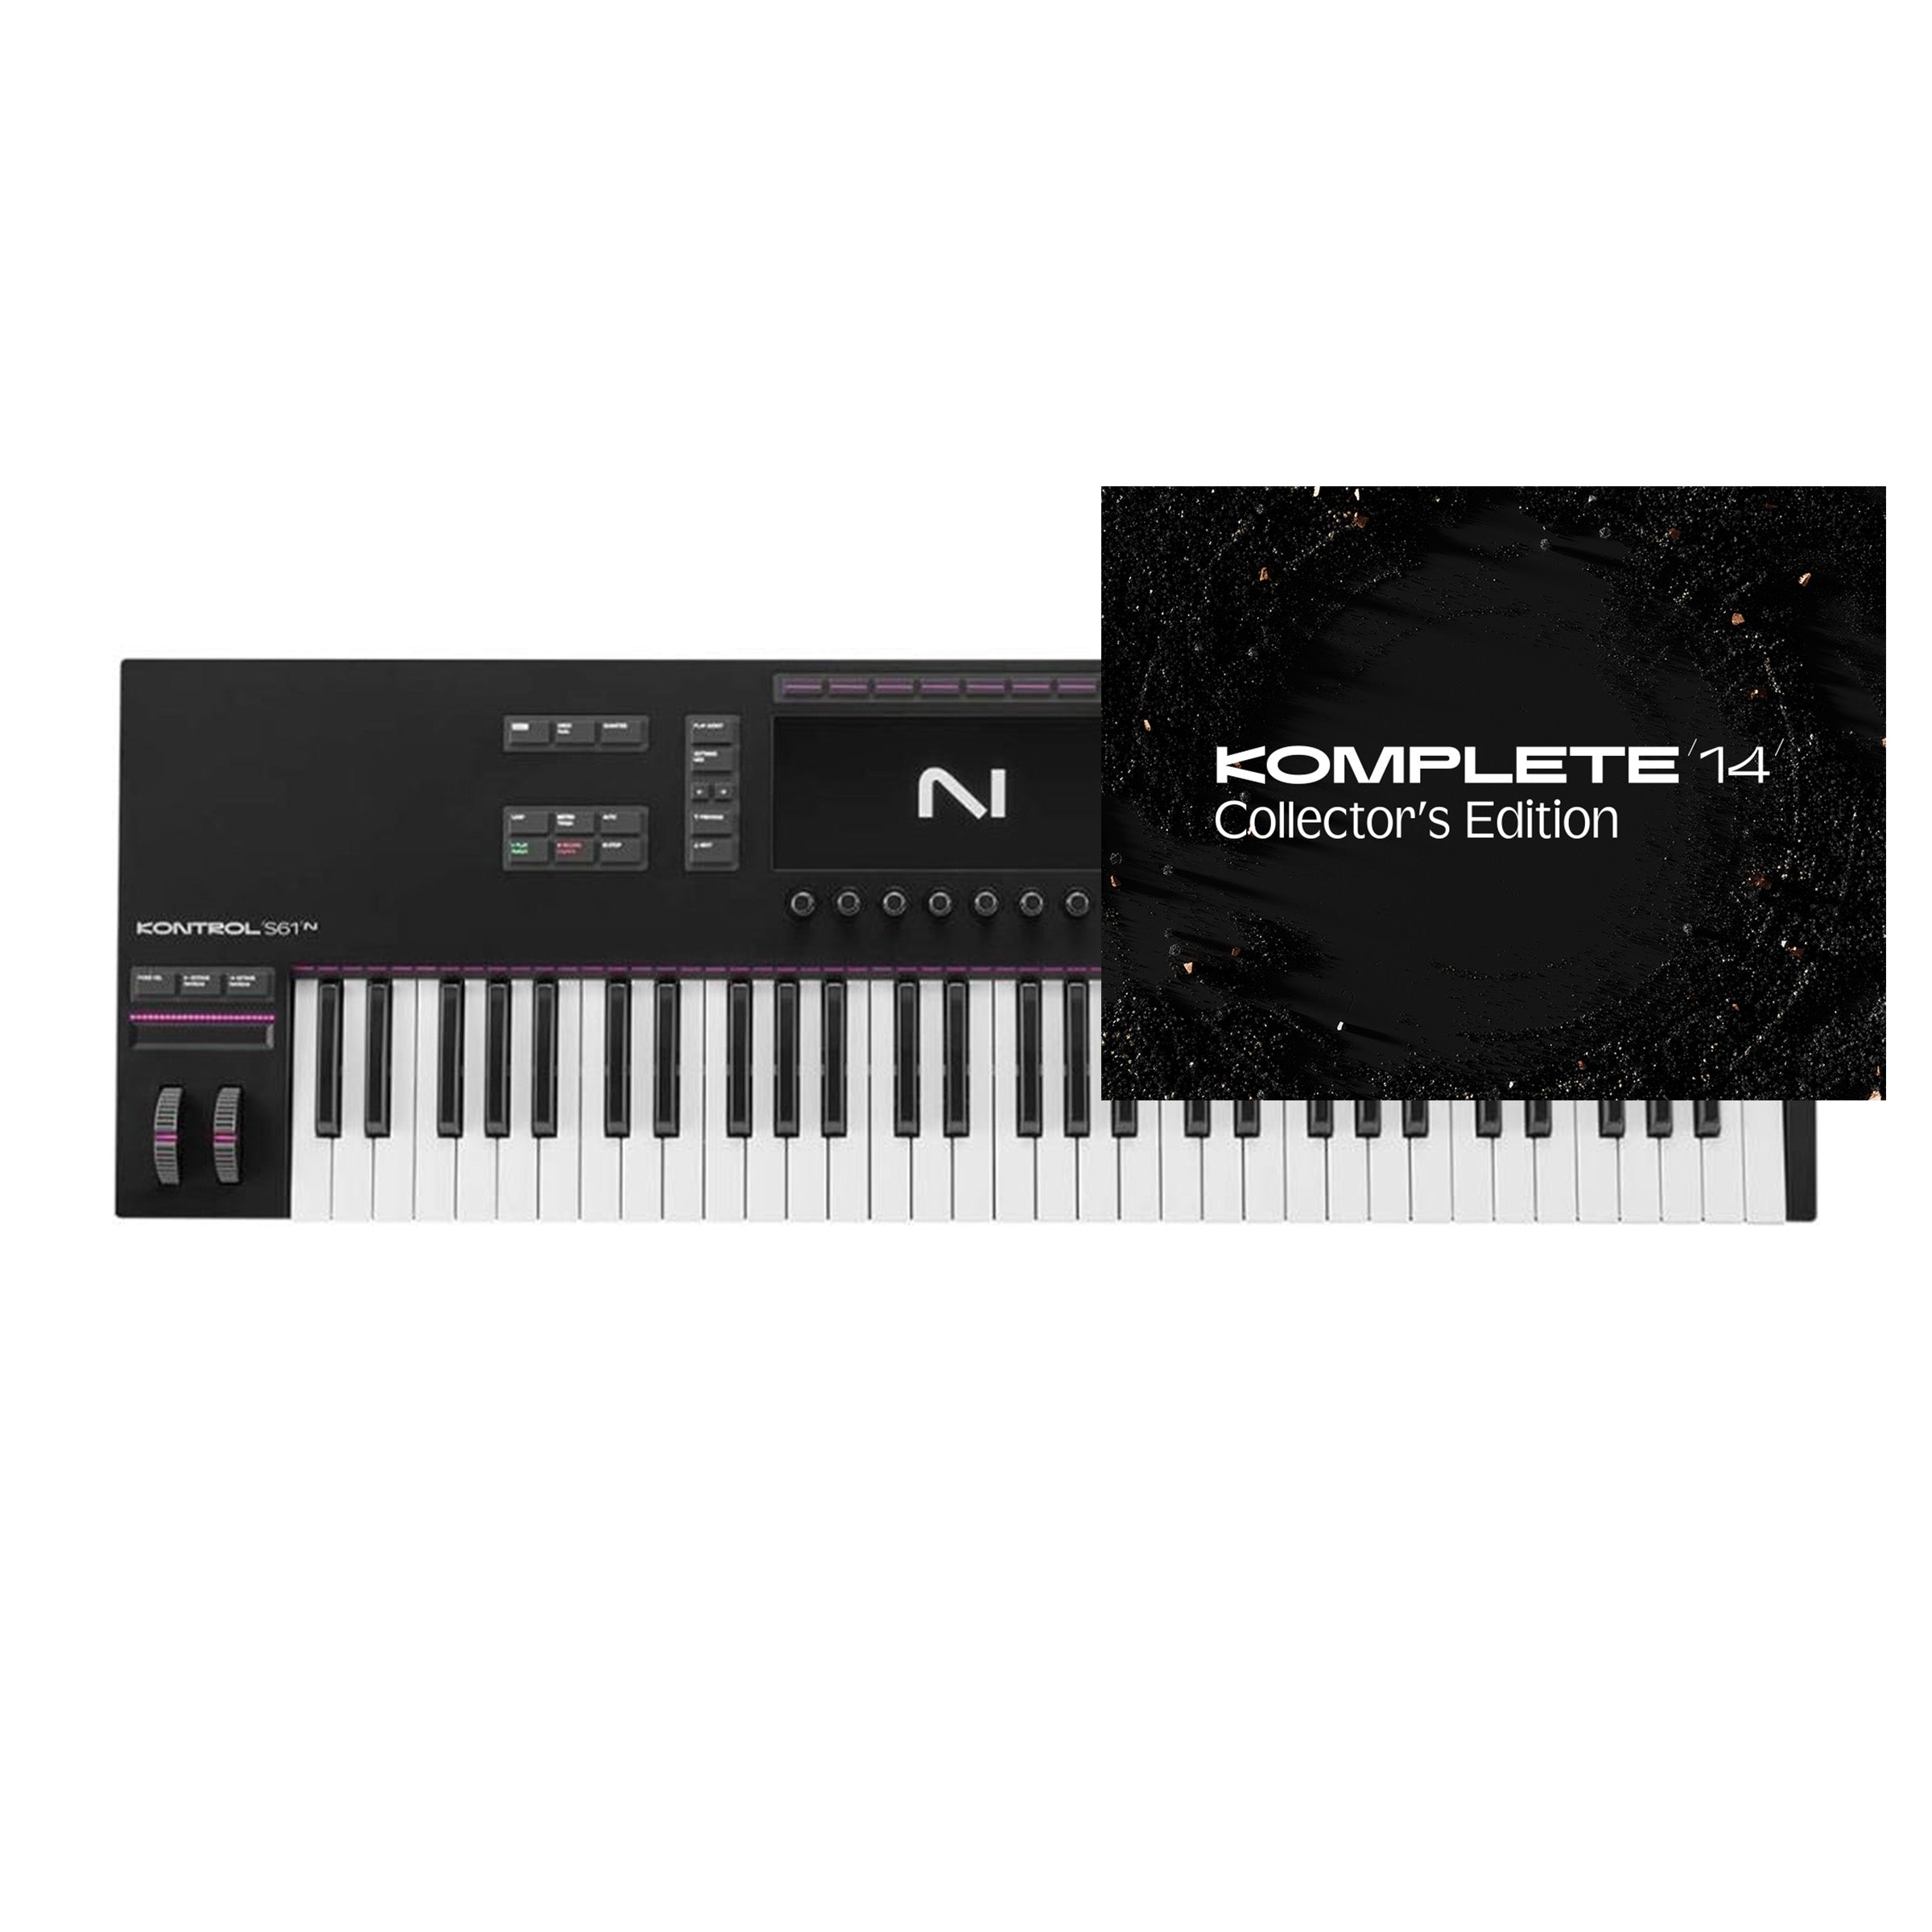 Native Instruments Kontrol S61 MK3 with Komplete 14 Collector's Edition